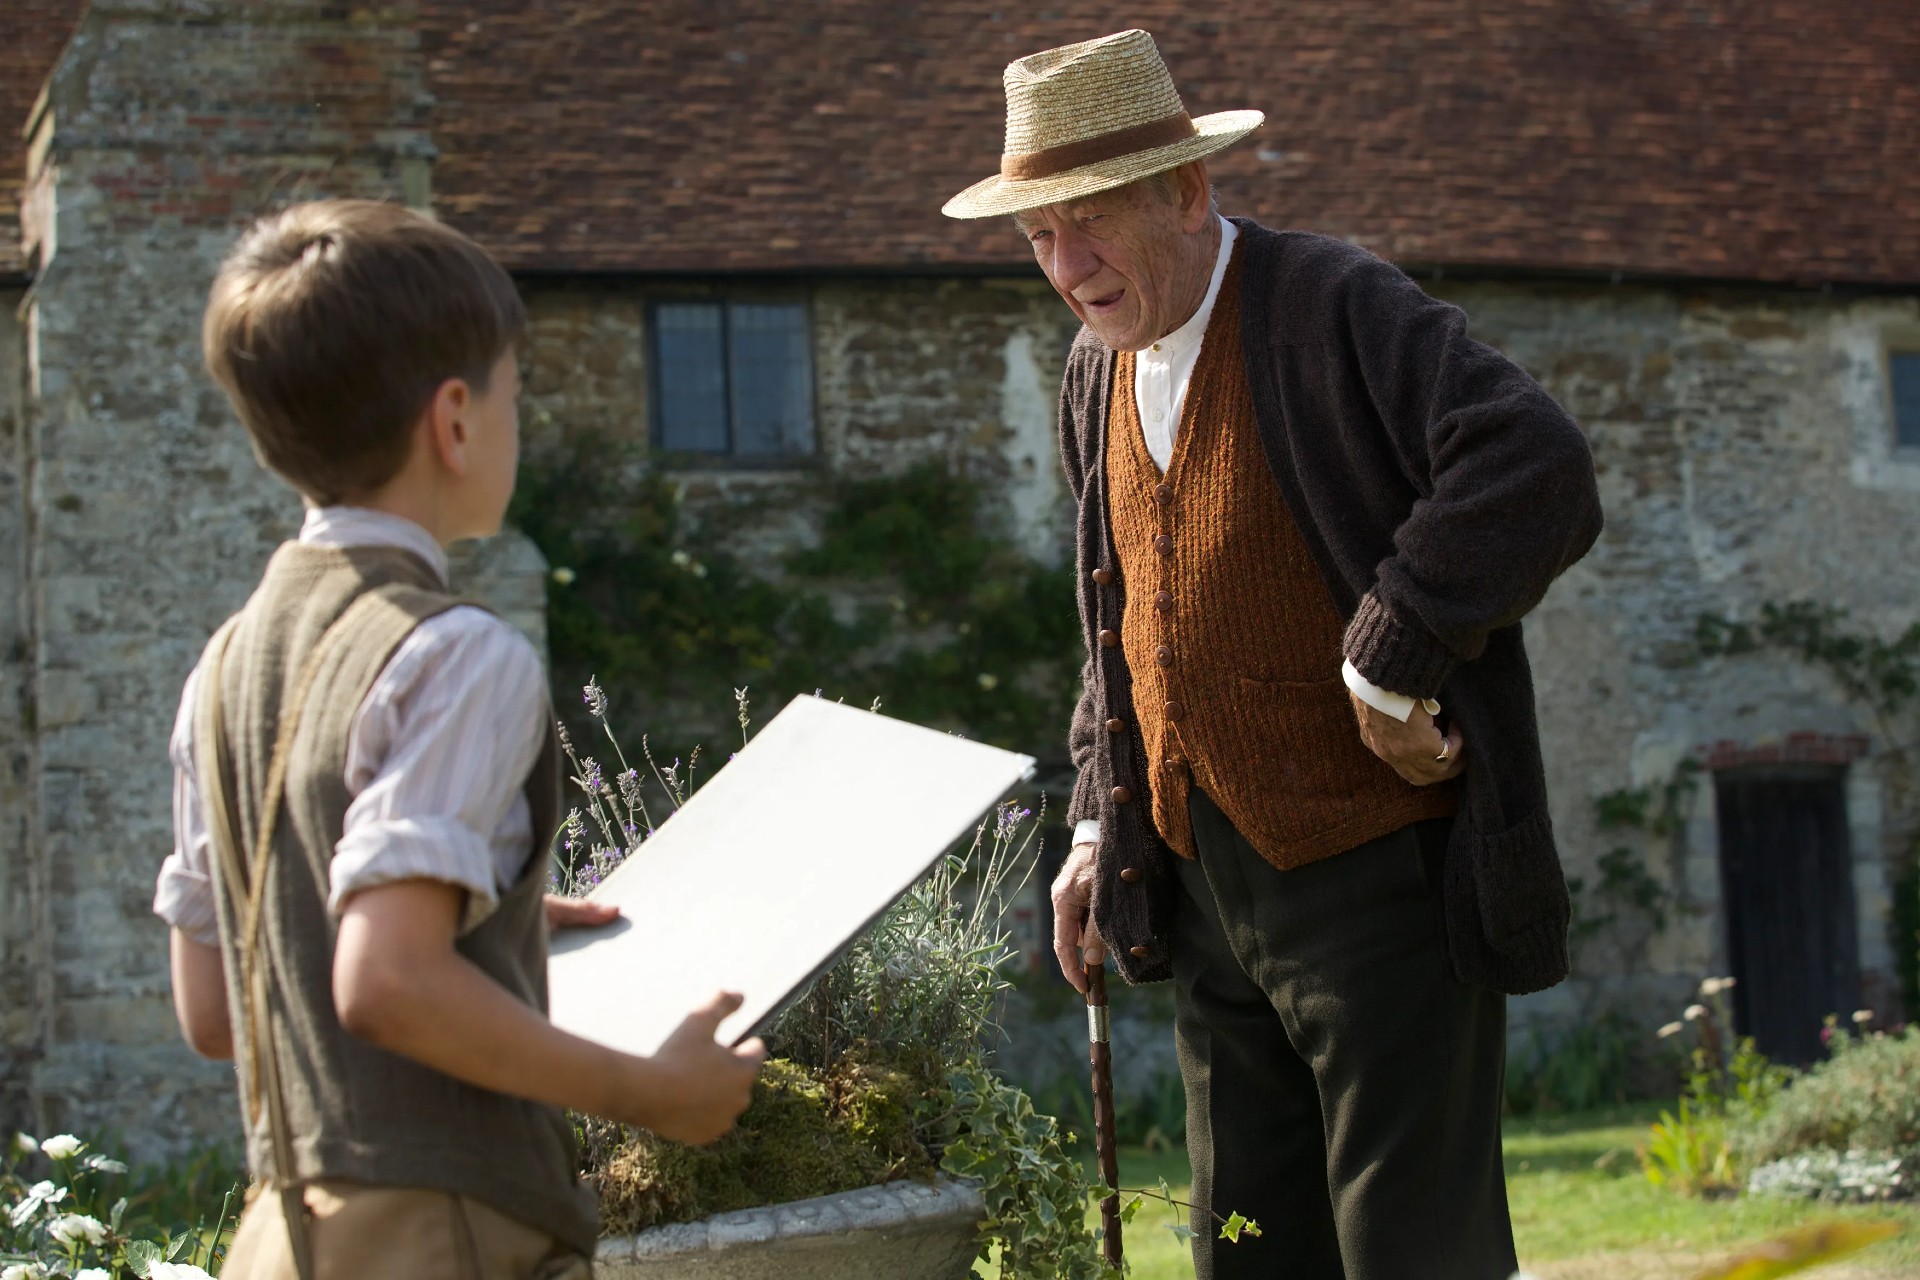 An old man talks to a kid in Mr. Holmes.